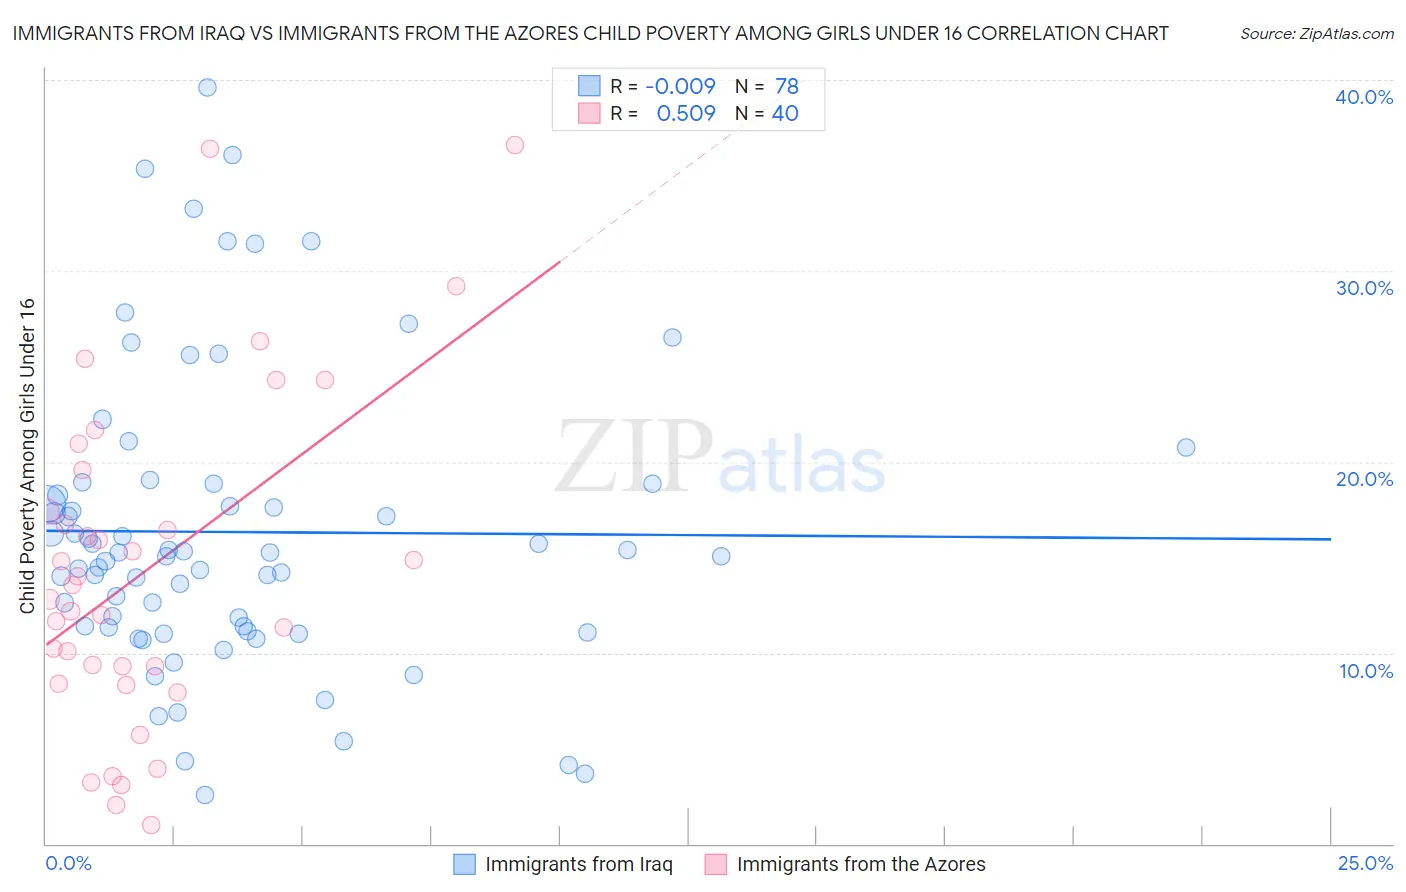 Immigrants from Iraq vs Immigrants from the Azores Child Poverty Among Girls Under 16